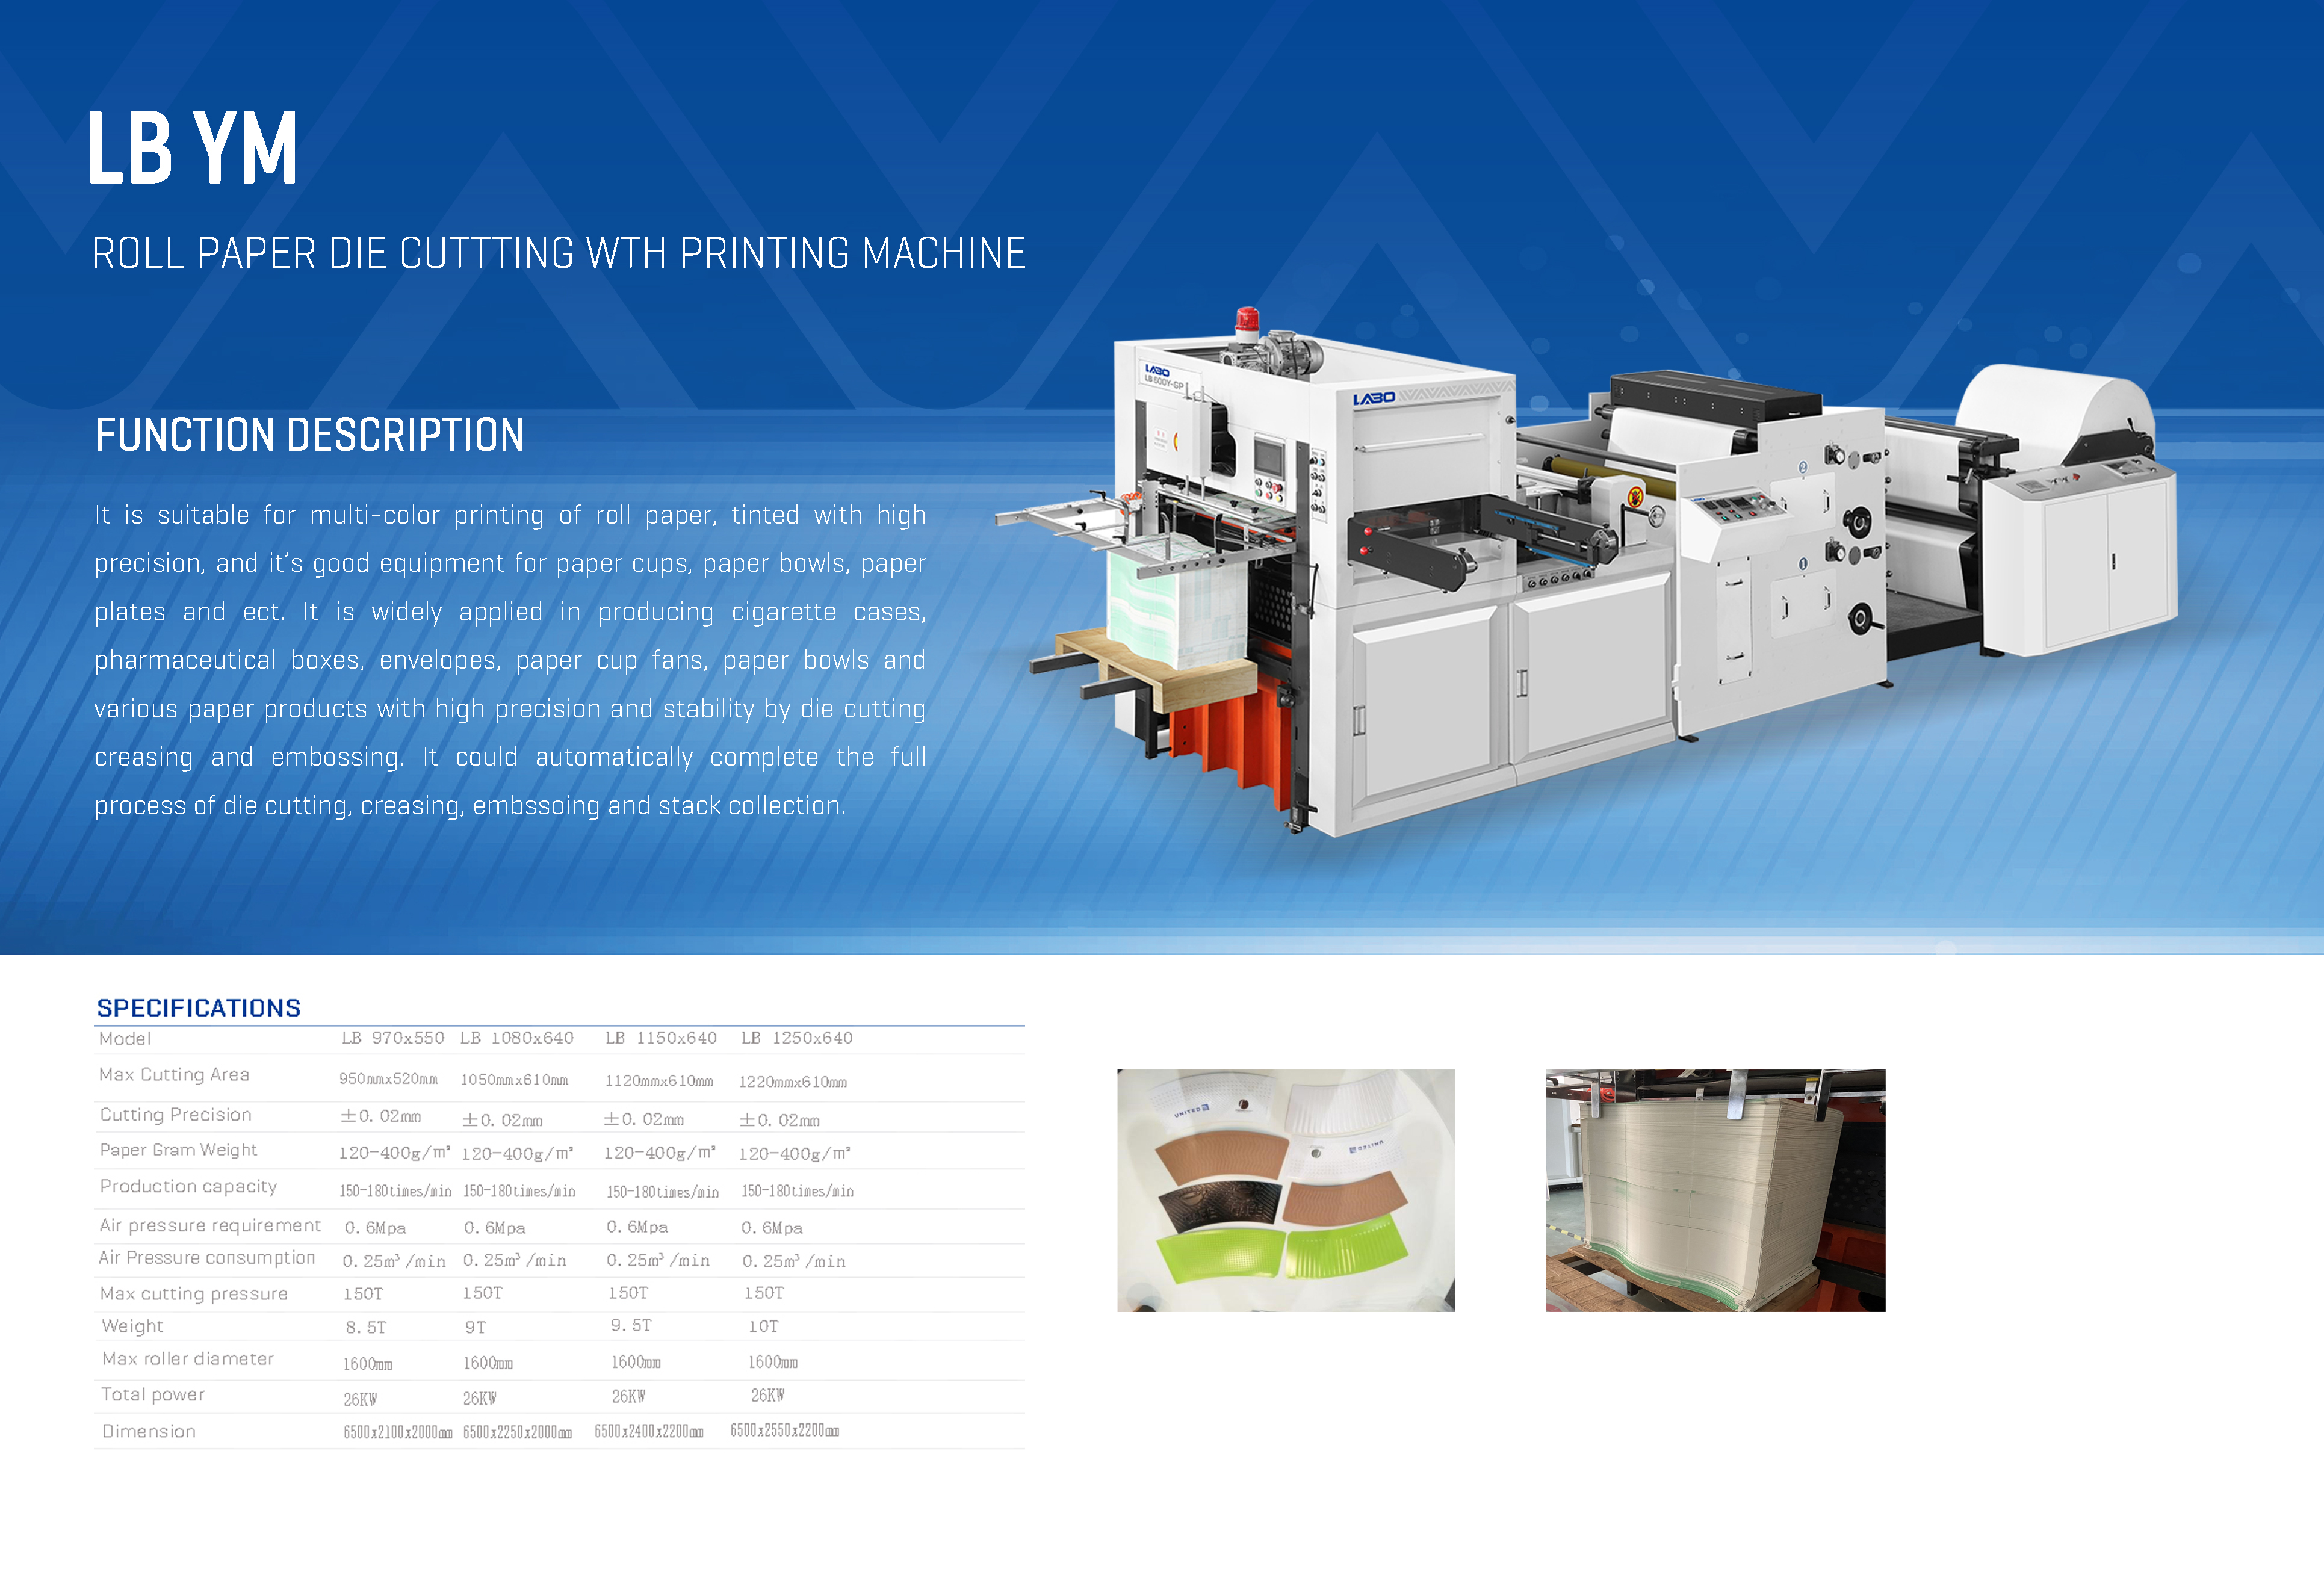 ROLL PAPER DIE CUTTING WITH PRINTING MACHINE